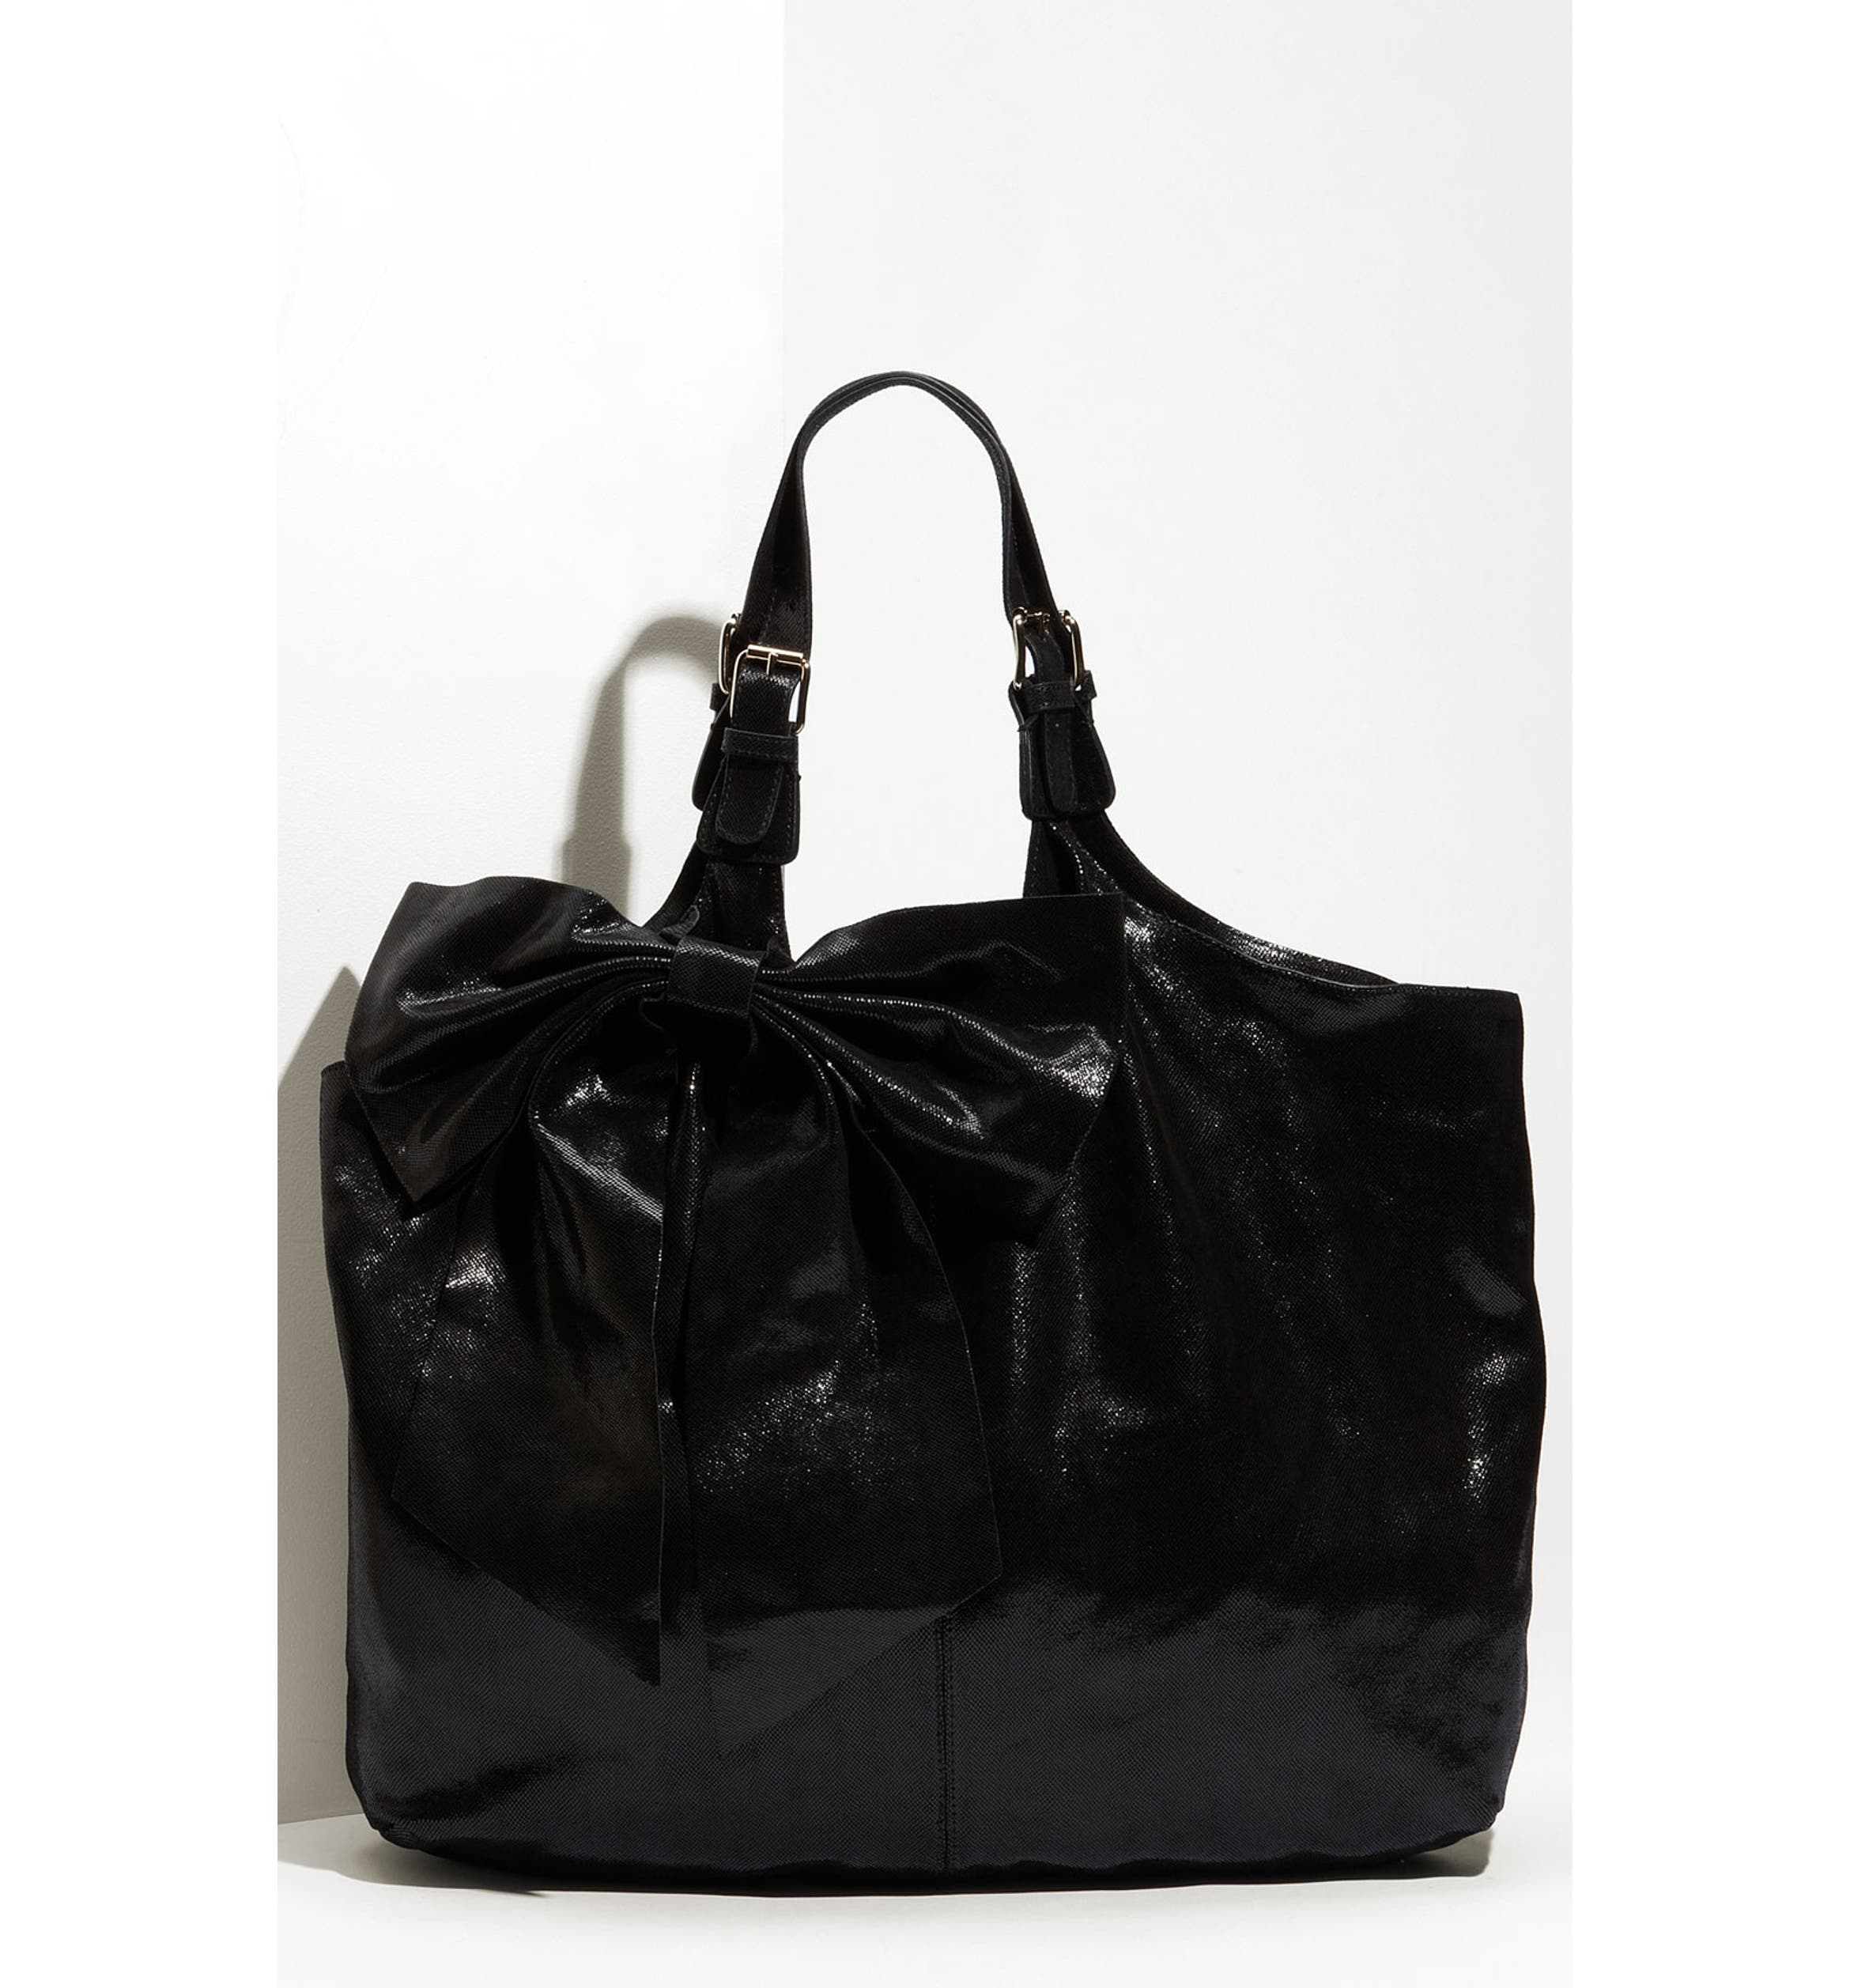 RED Valentino 'Bow' Leather Tote | Nordstrom